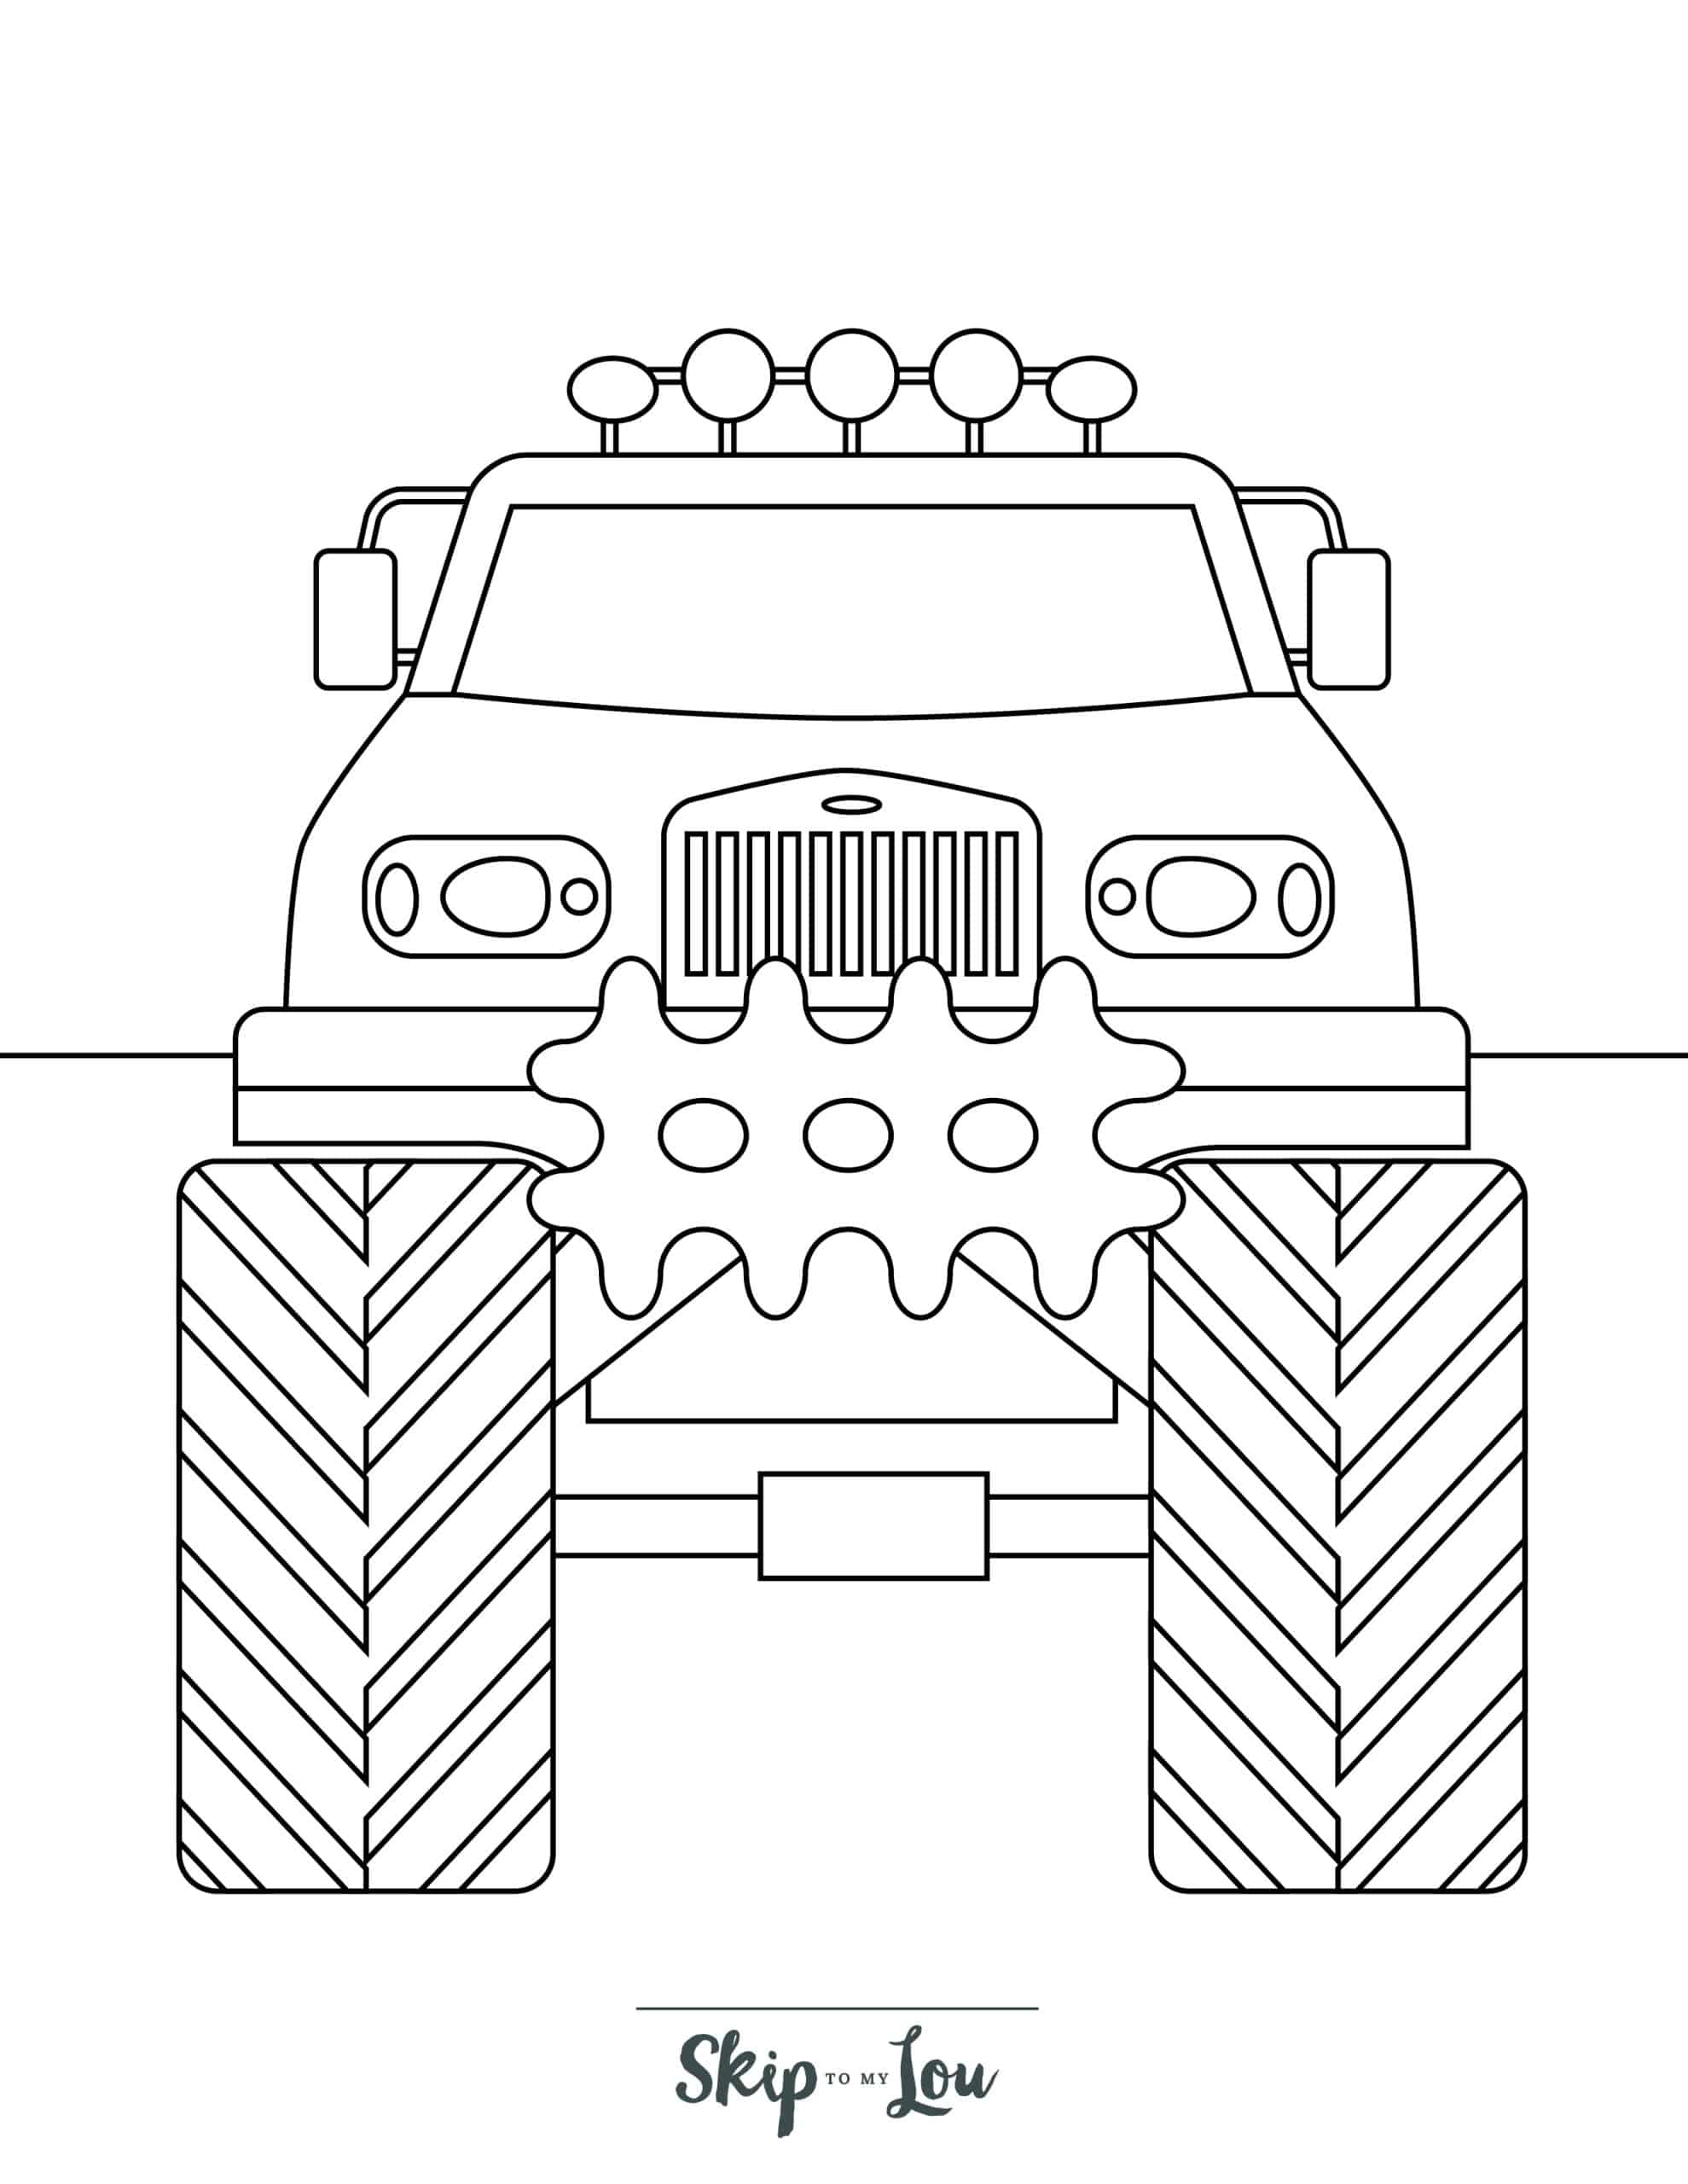 Free printable monster truck coloring pages skip to my lou